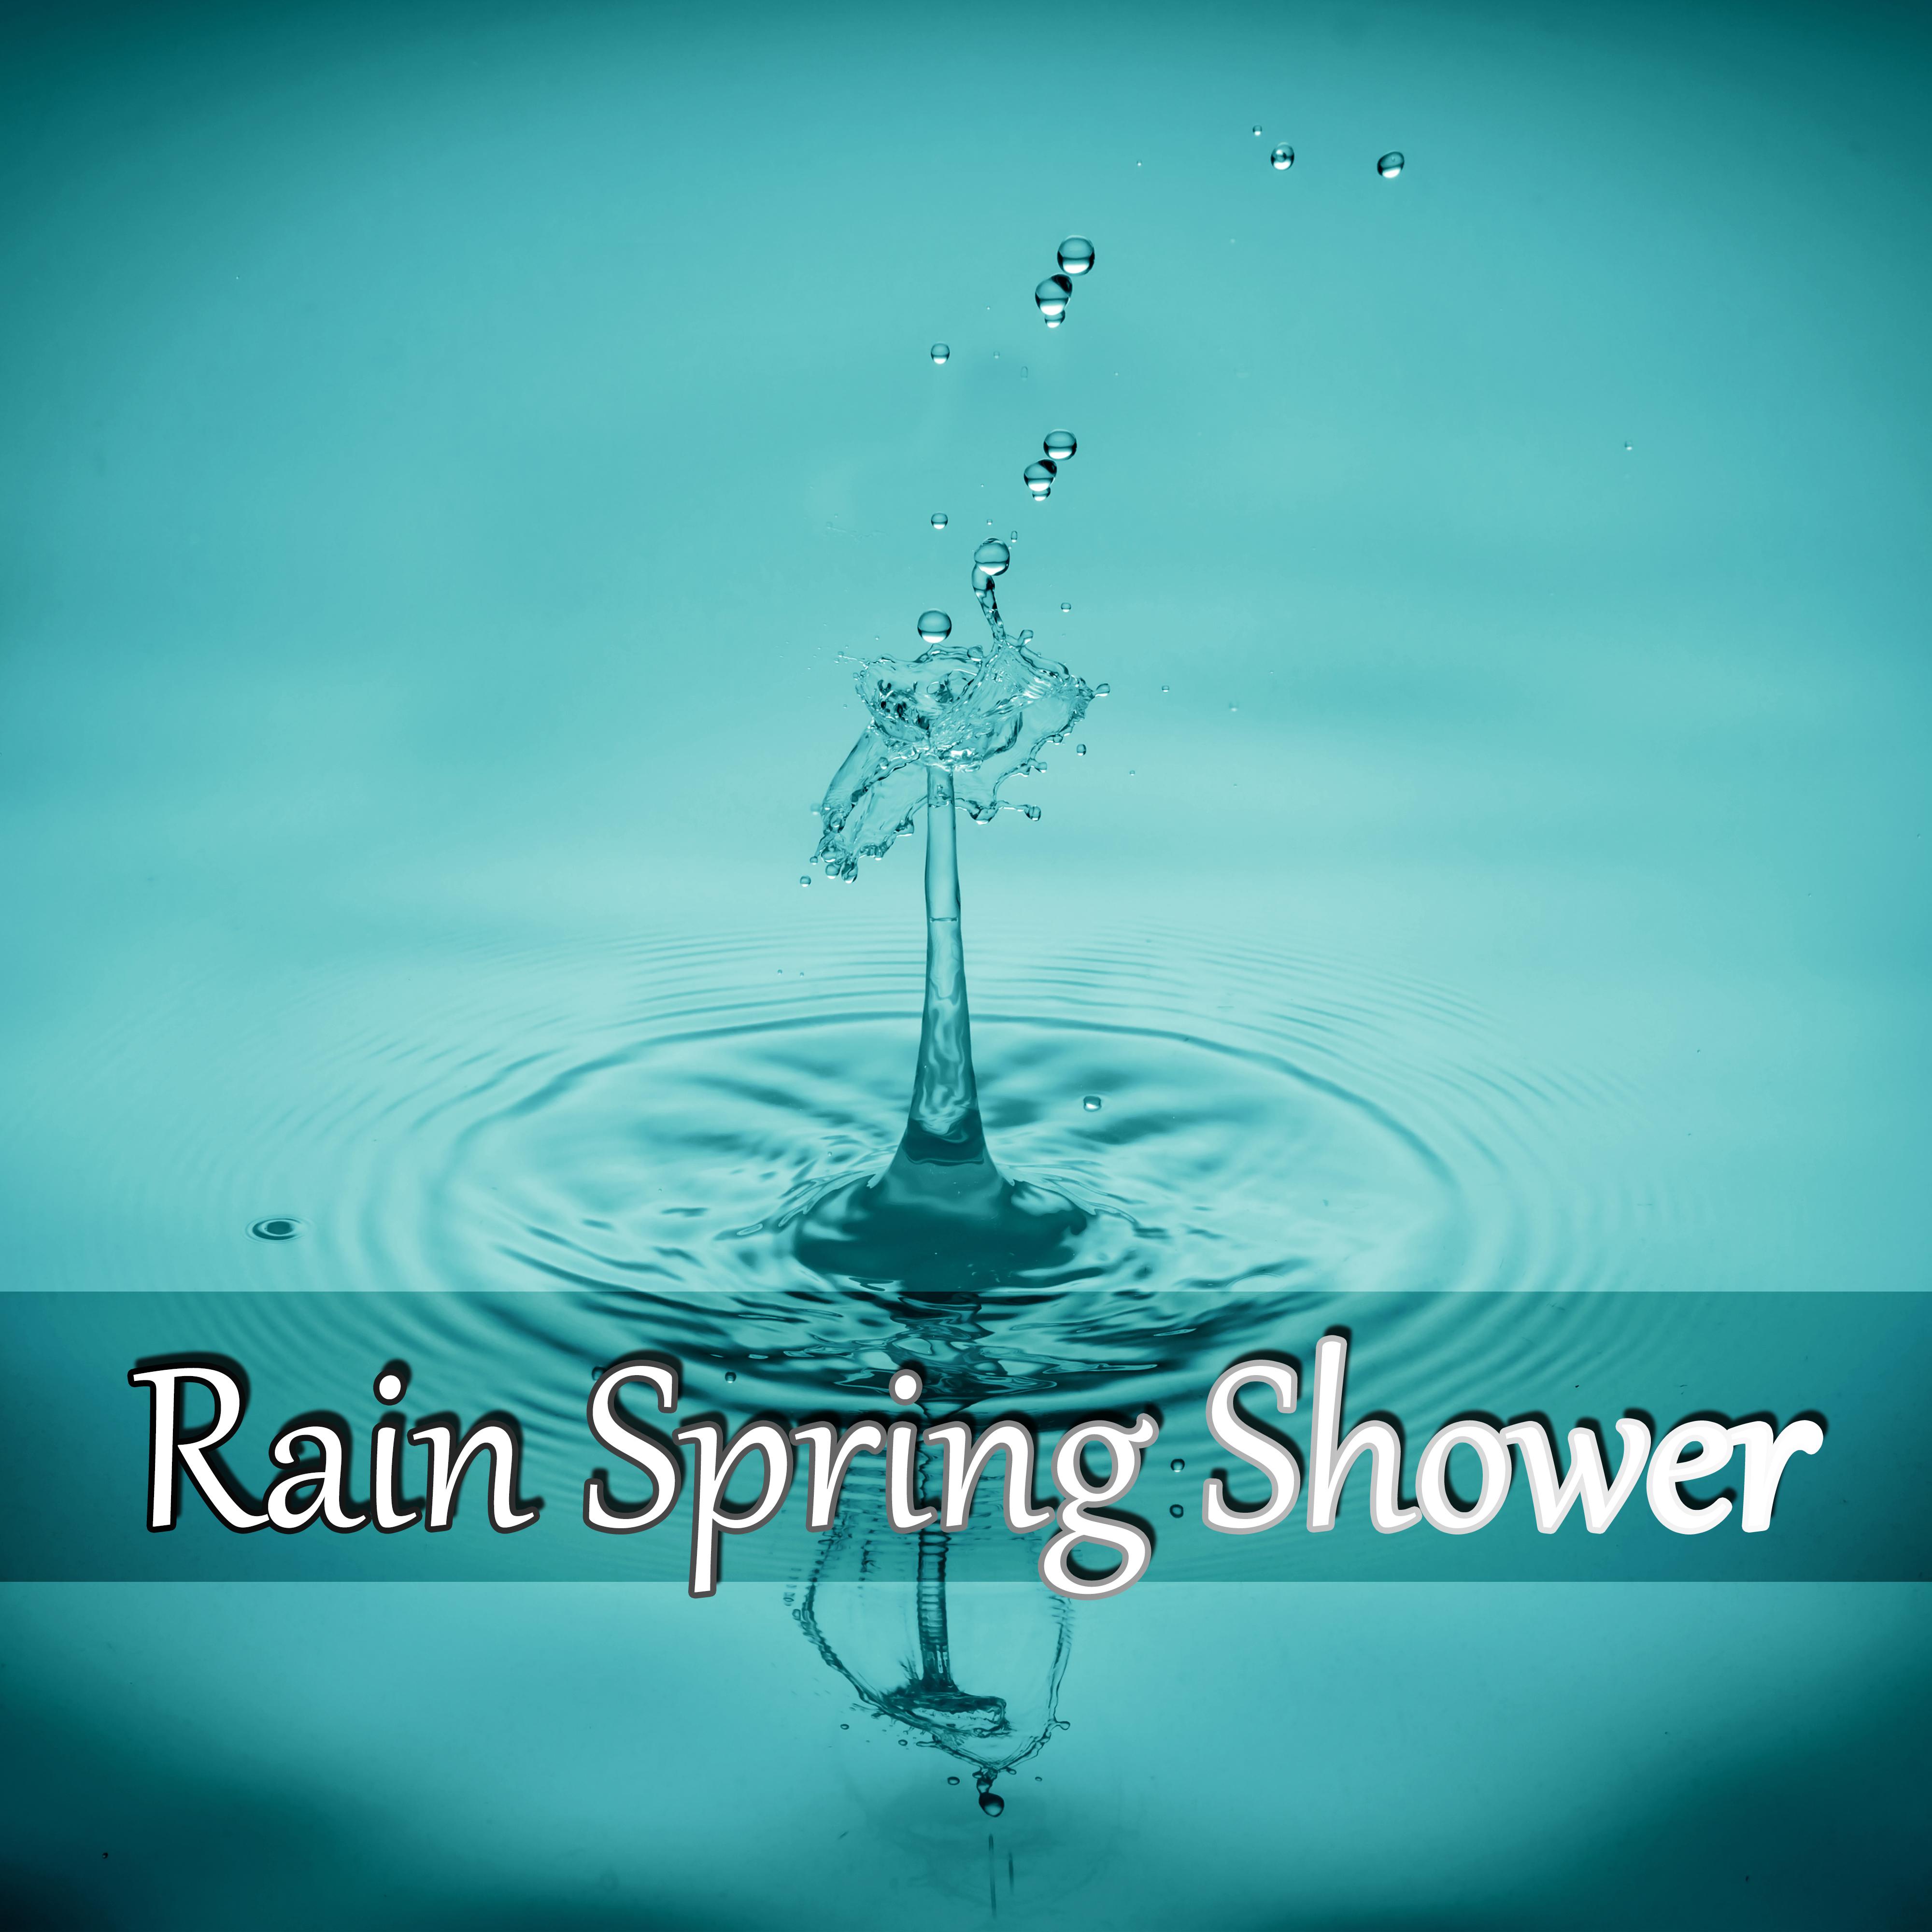 Rain Spring Shower  Sound of Summer Rain, Calm Relaxing Nature Sounds, Water Sound Perfect for Sleep, Massage, Tai Chi, Meditation, Serenity Music to Reduce Anxiety and Sadness, Music for Babies